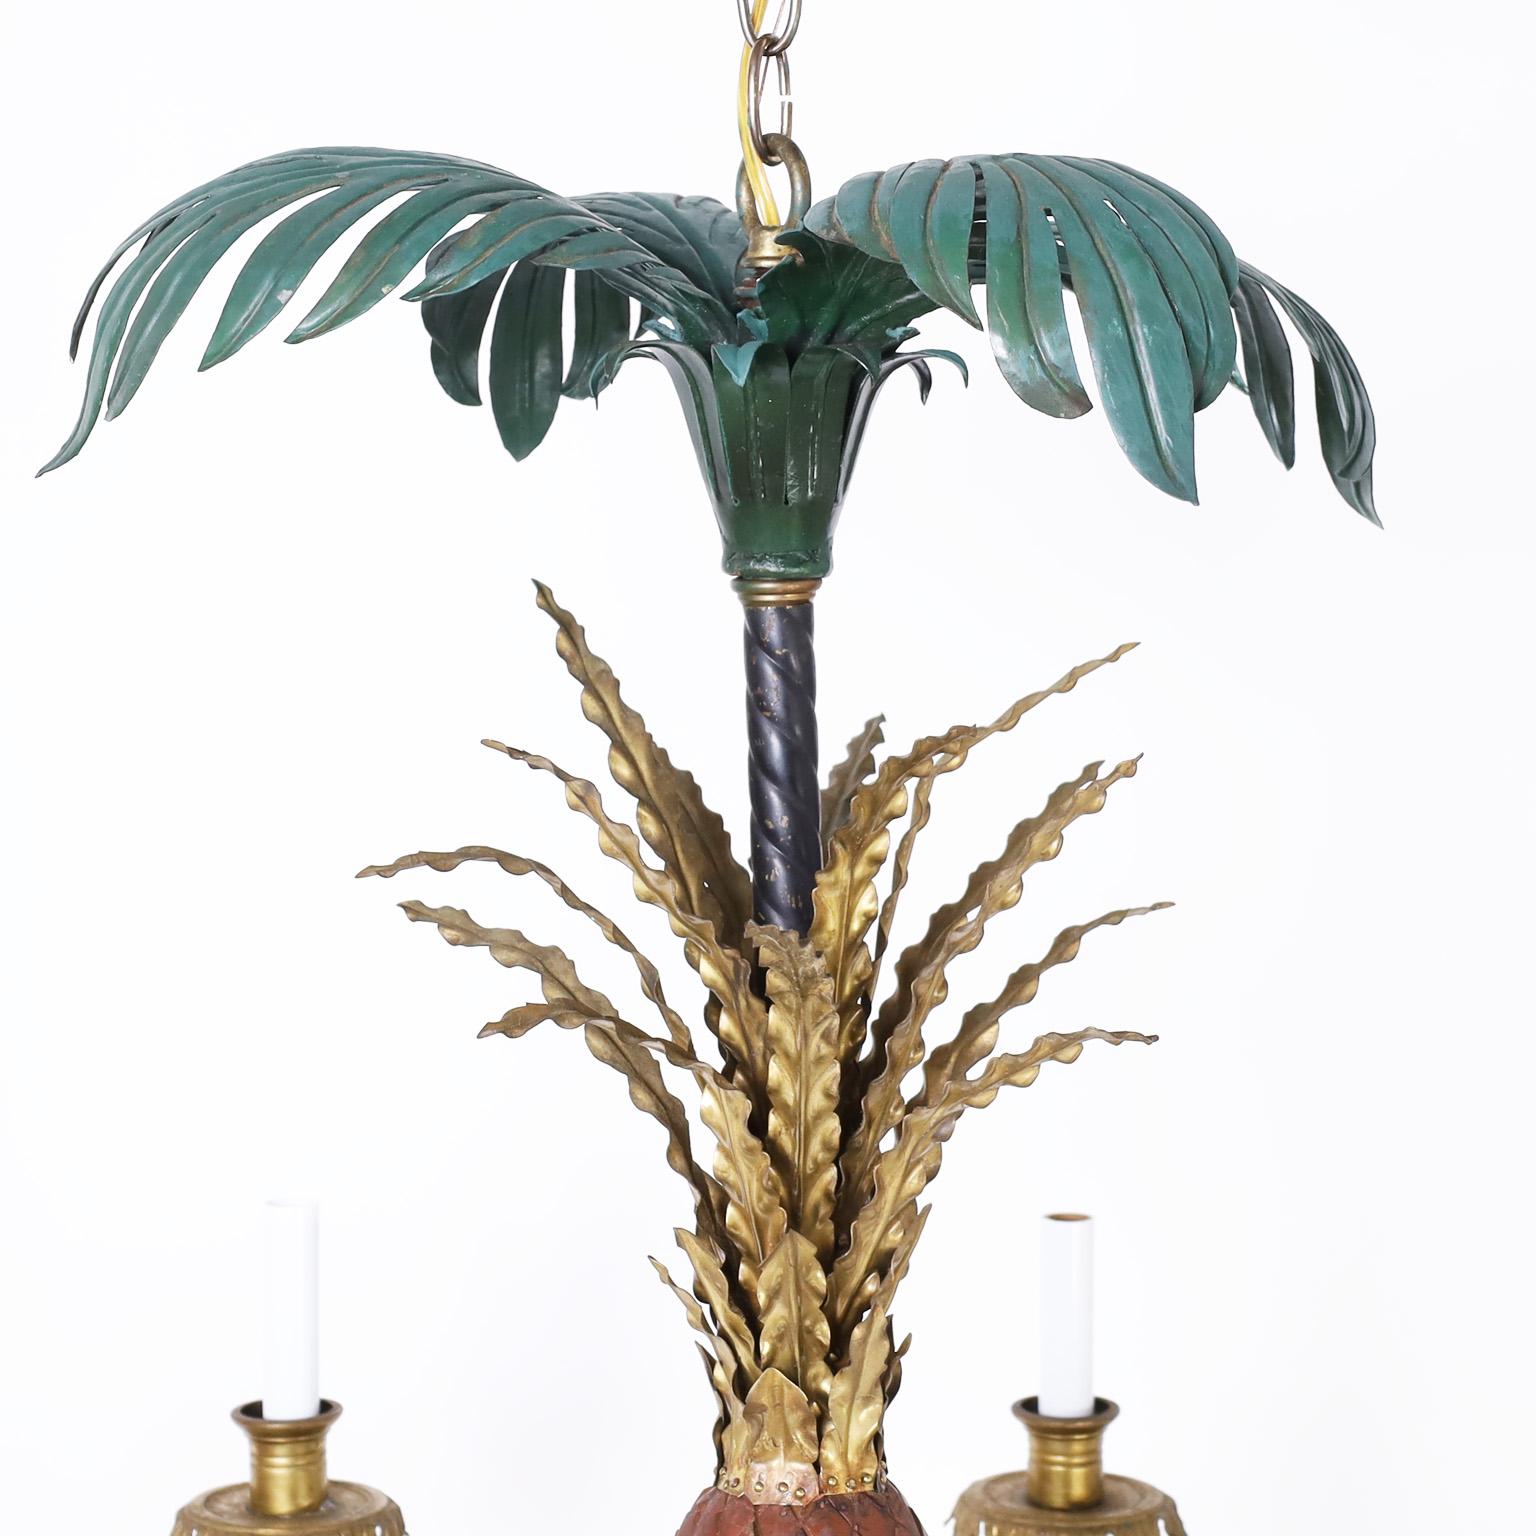 Eight light chandelier crafted in brass and painted metal in a classic composition with palm fronds at the top over a tole pineapple with brass leaves. The eight tole palm leaf arms support brass acanthus leaf sockets.